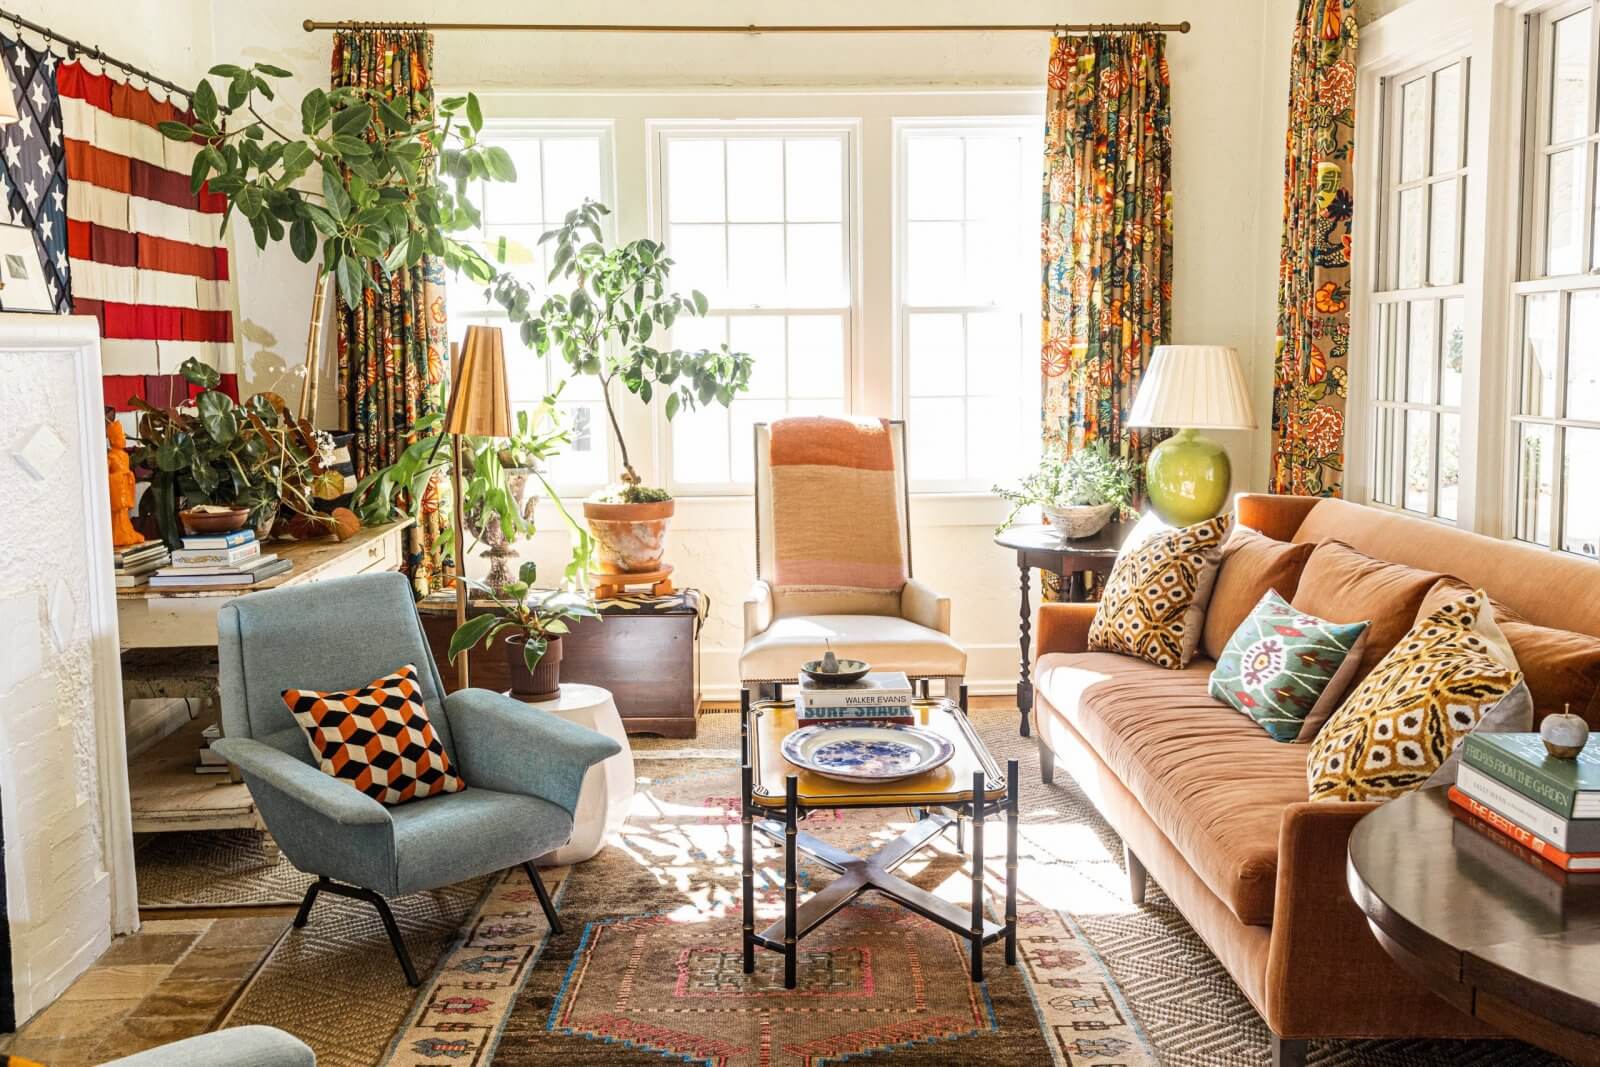 This Spanish Mission-Style Home Embodies Cozy, Eclectic Design